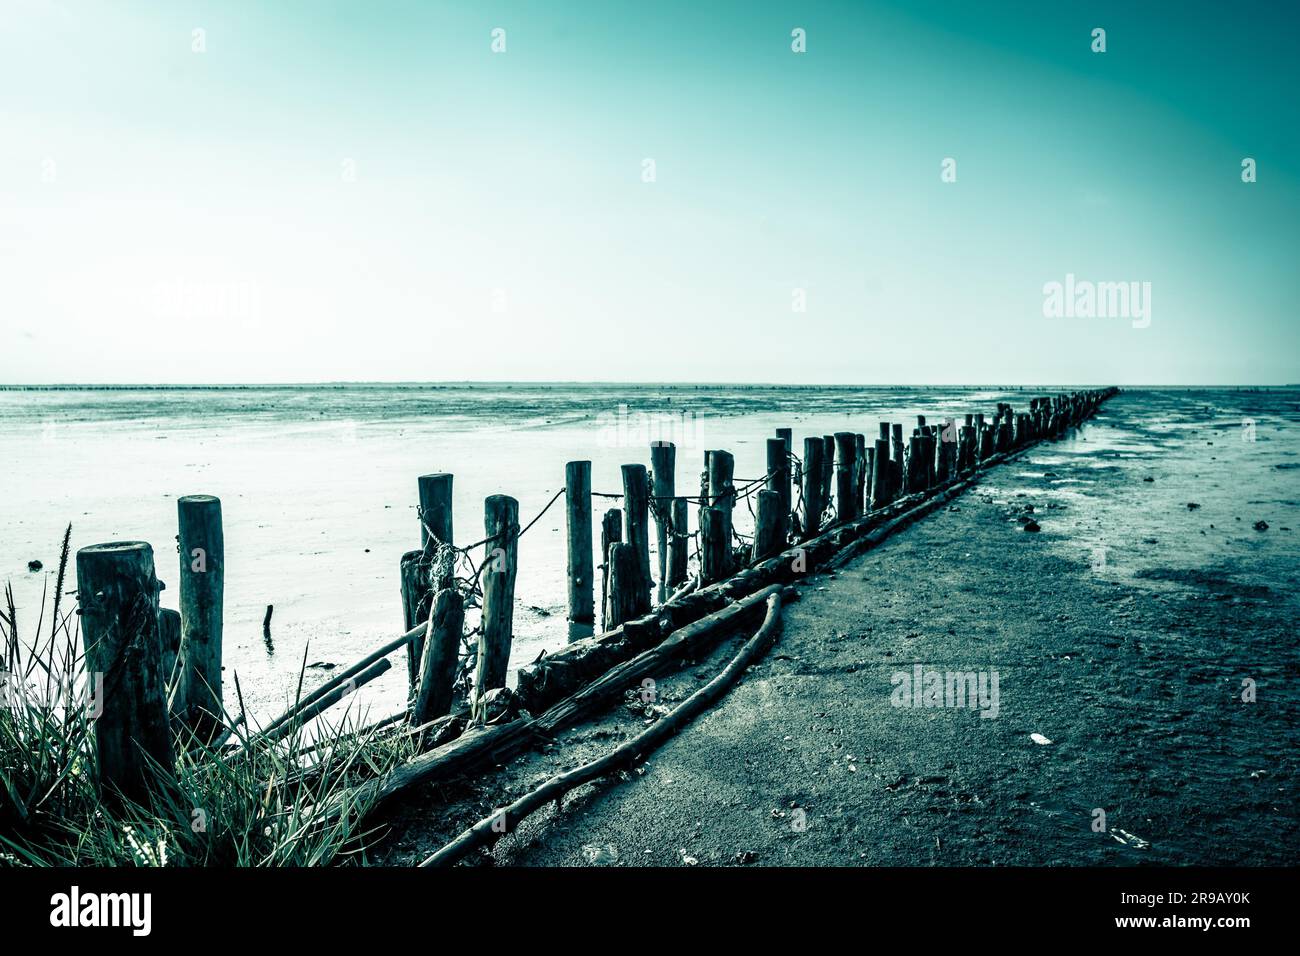 Wooden poles on a low tide beach Stock Photo